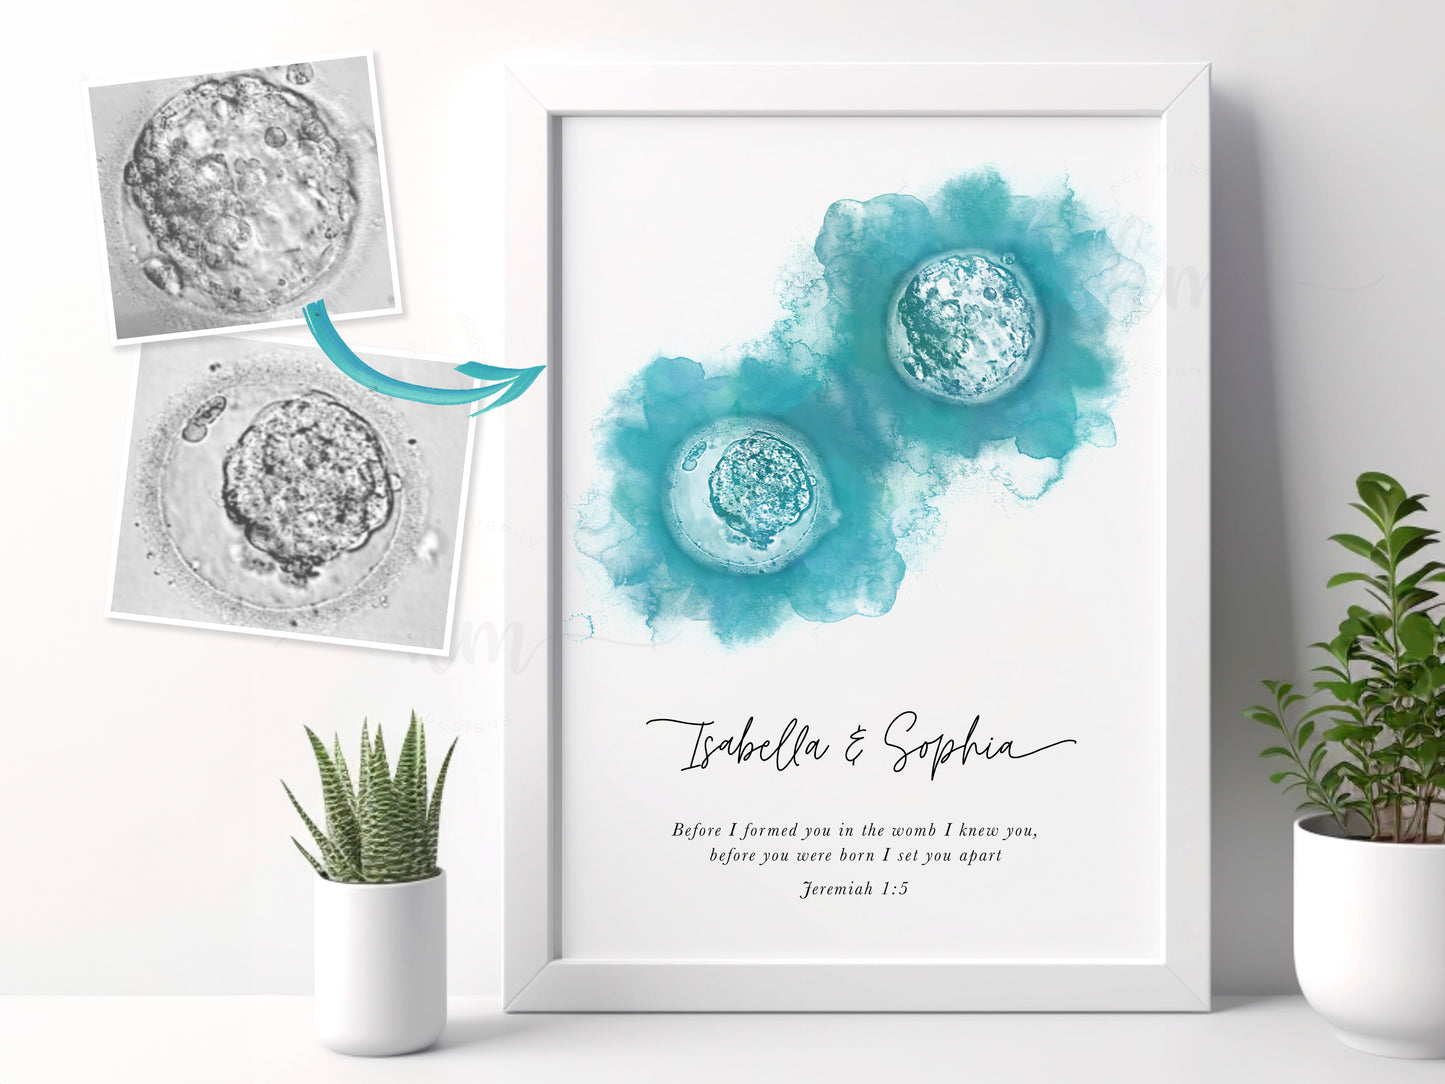 Hand-Painted Watercolor Twins IVF Embryo Art